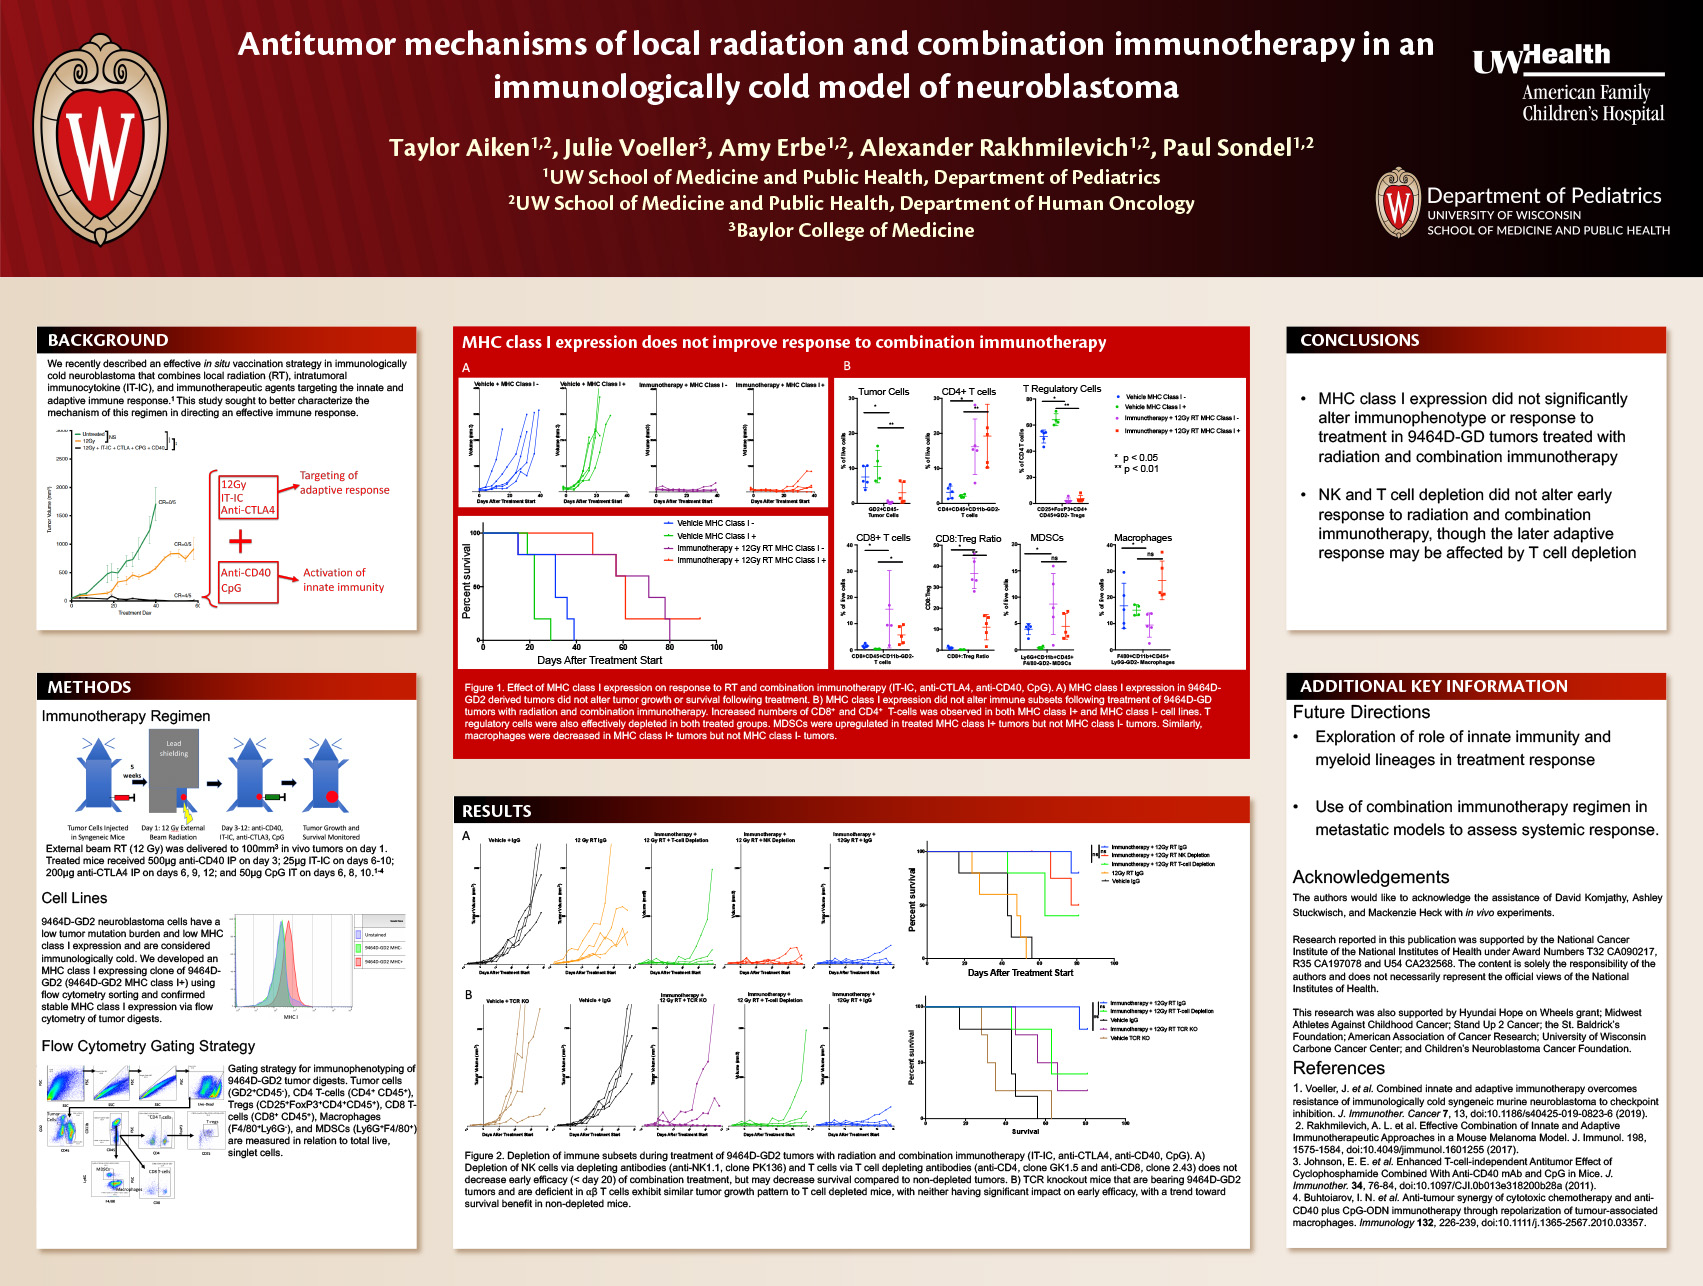 Antitumor mechanisms of local radiation and combination immunotherapy in an immunologically cold model of neuroblastoma poster image